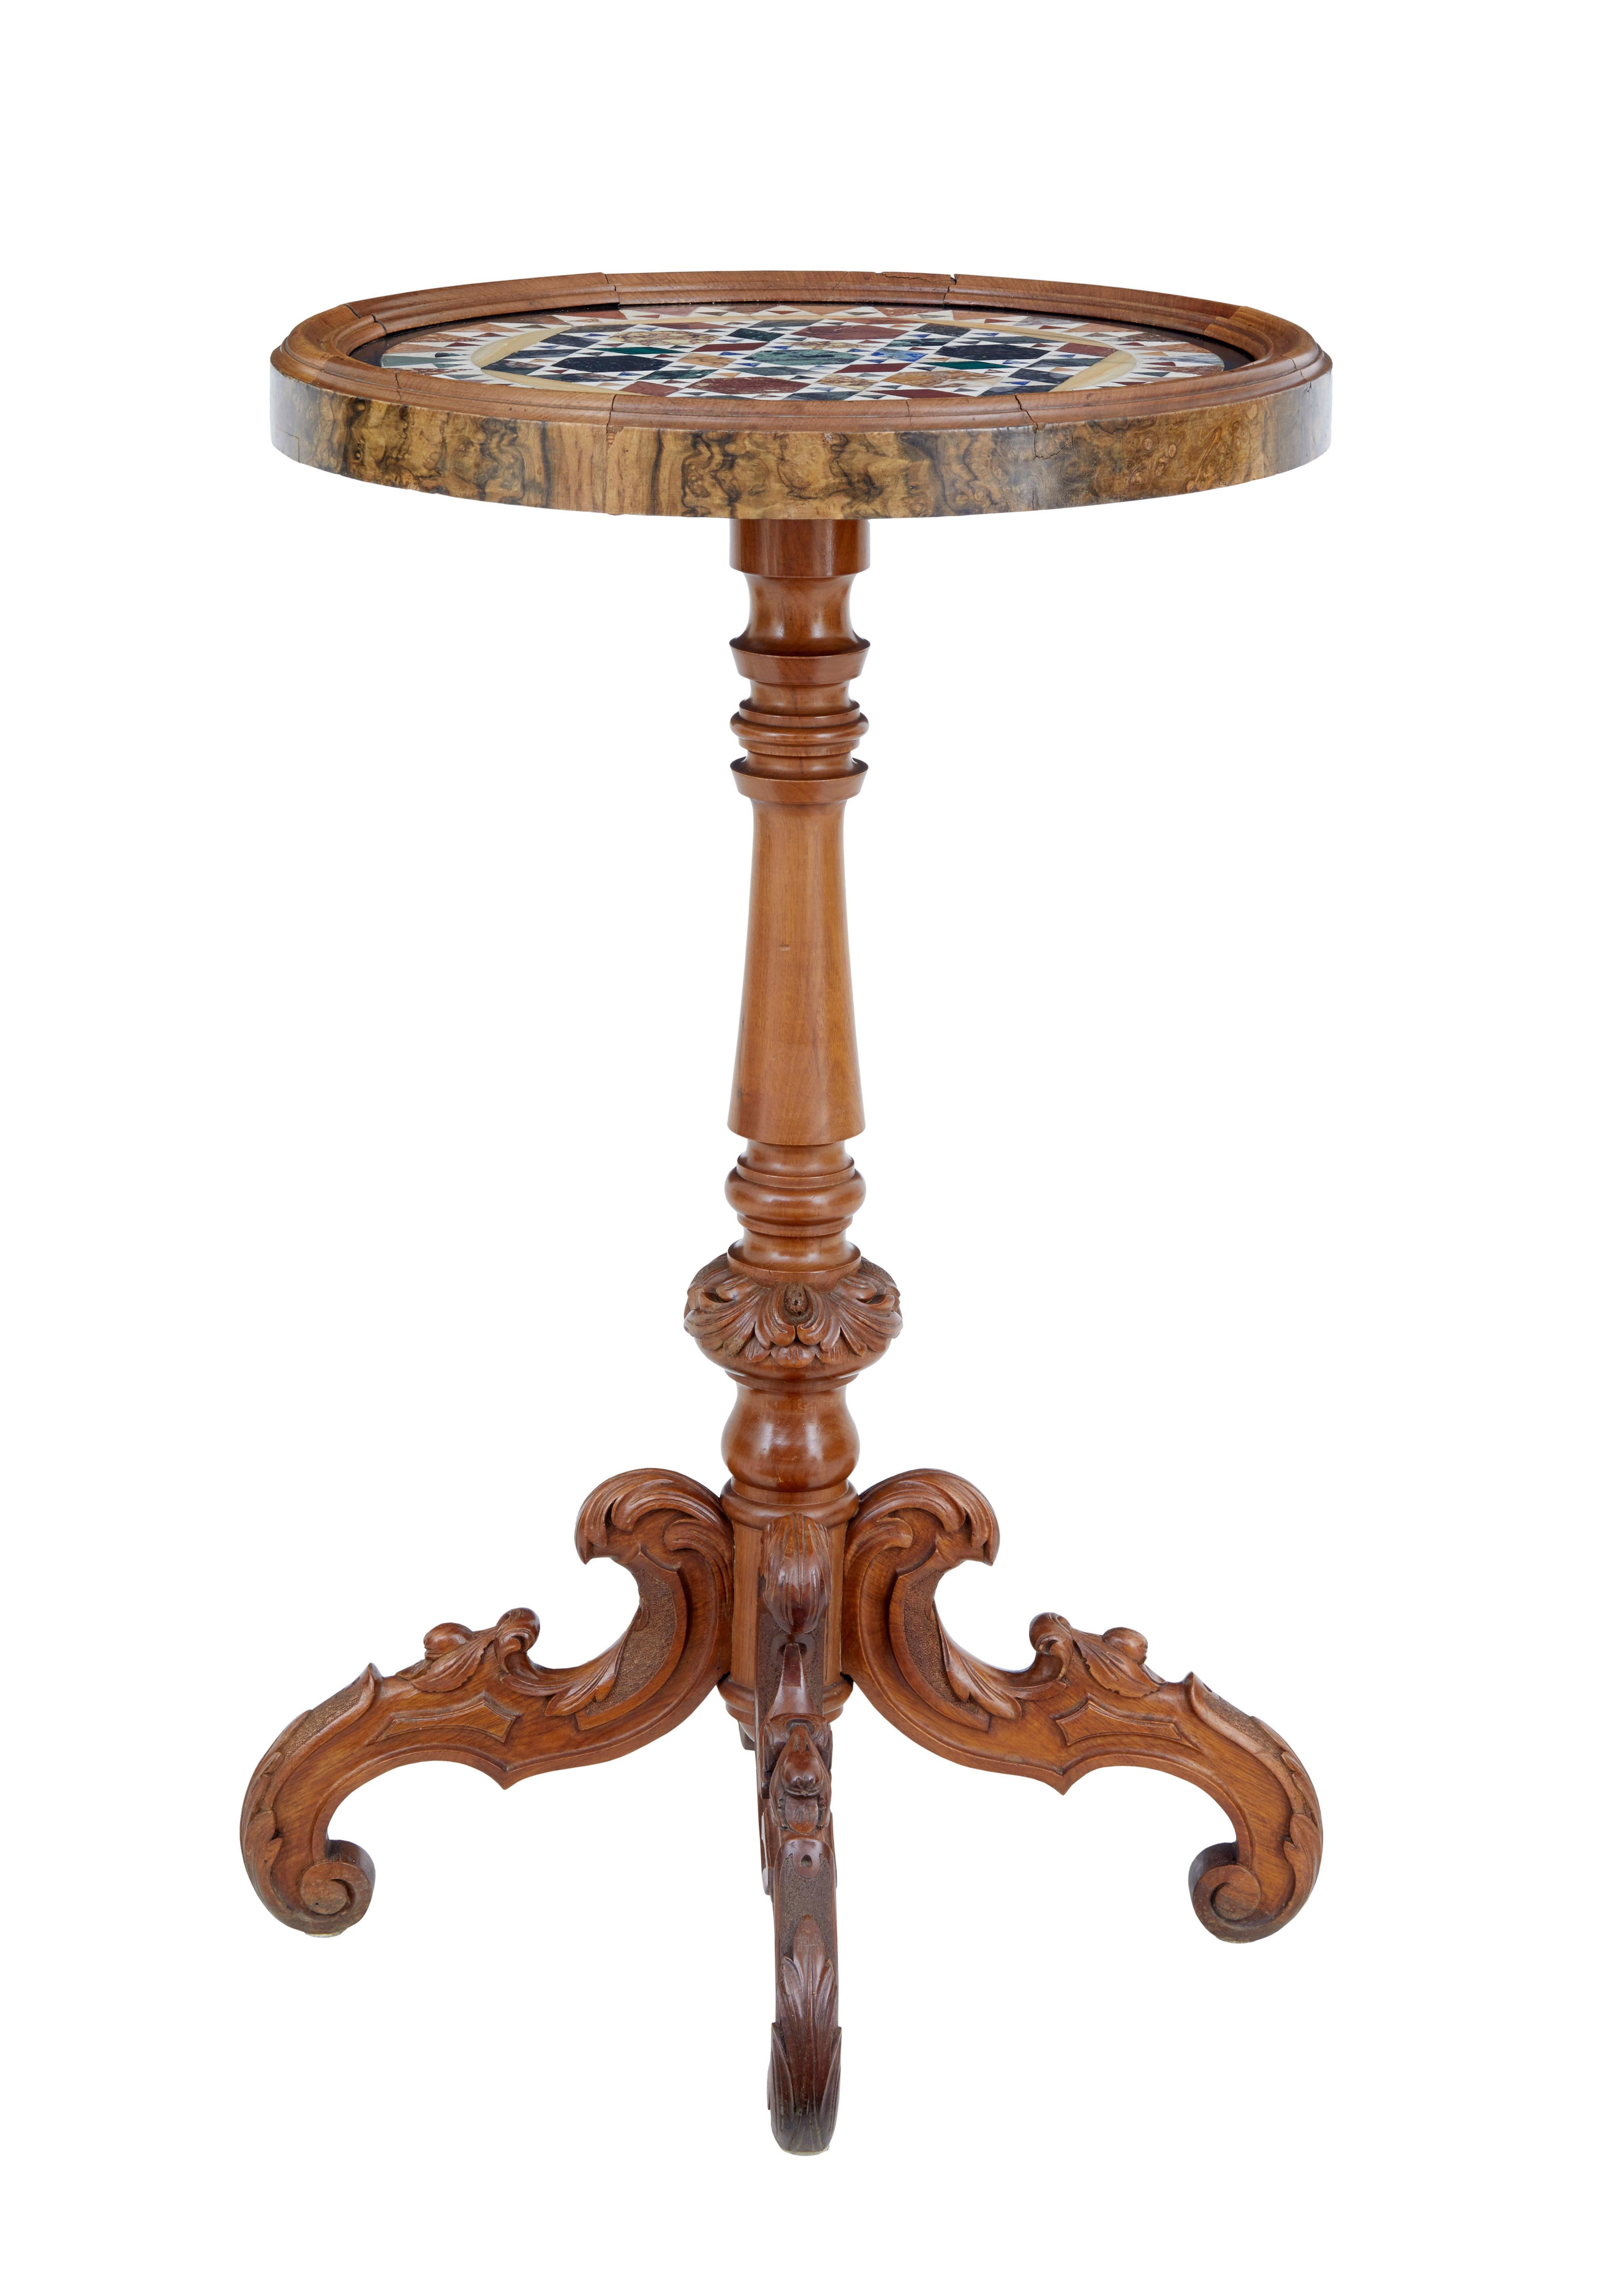 Good quality Pietra Dura specimen marble-top table, circa 1880.

Beautiful circular marble top showcasing various samples of colored marble into a symmetrical pattern, secured in place by a walnut slip with burr veneer around the outer